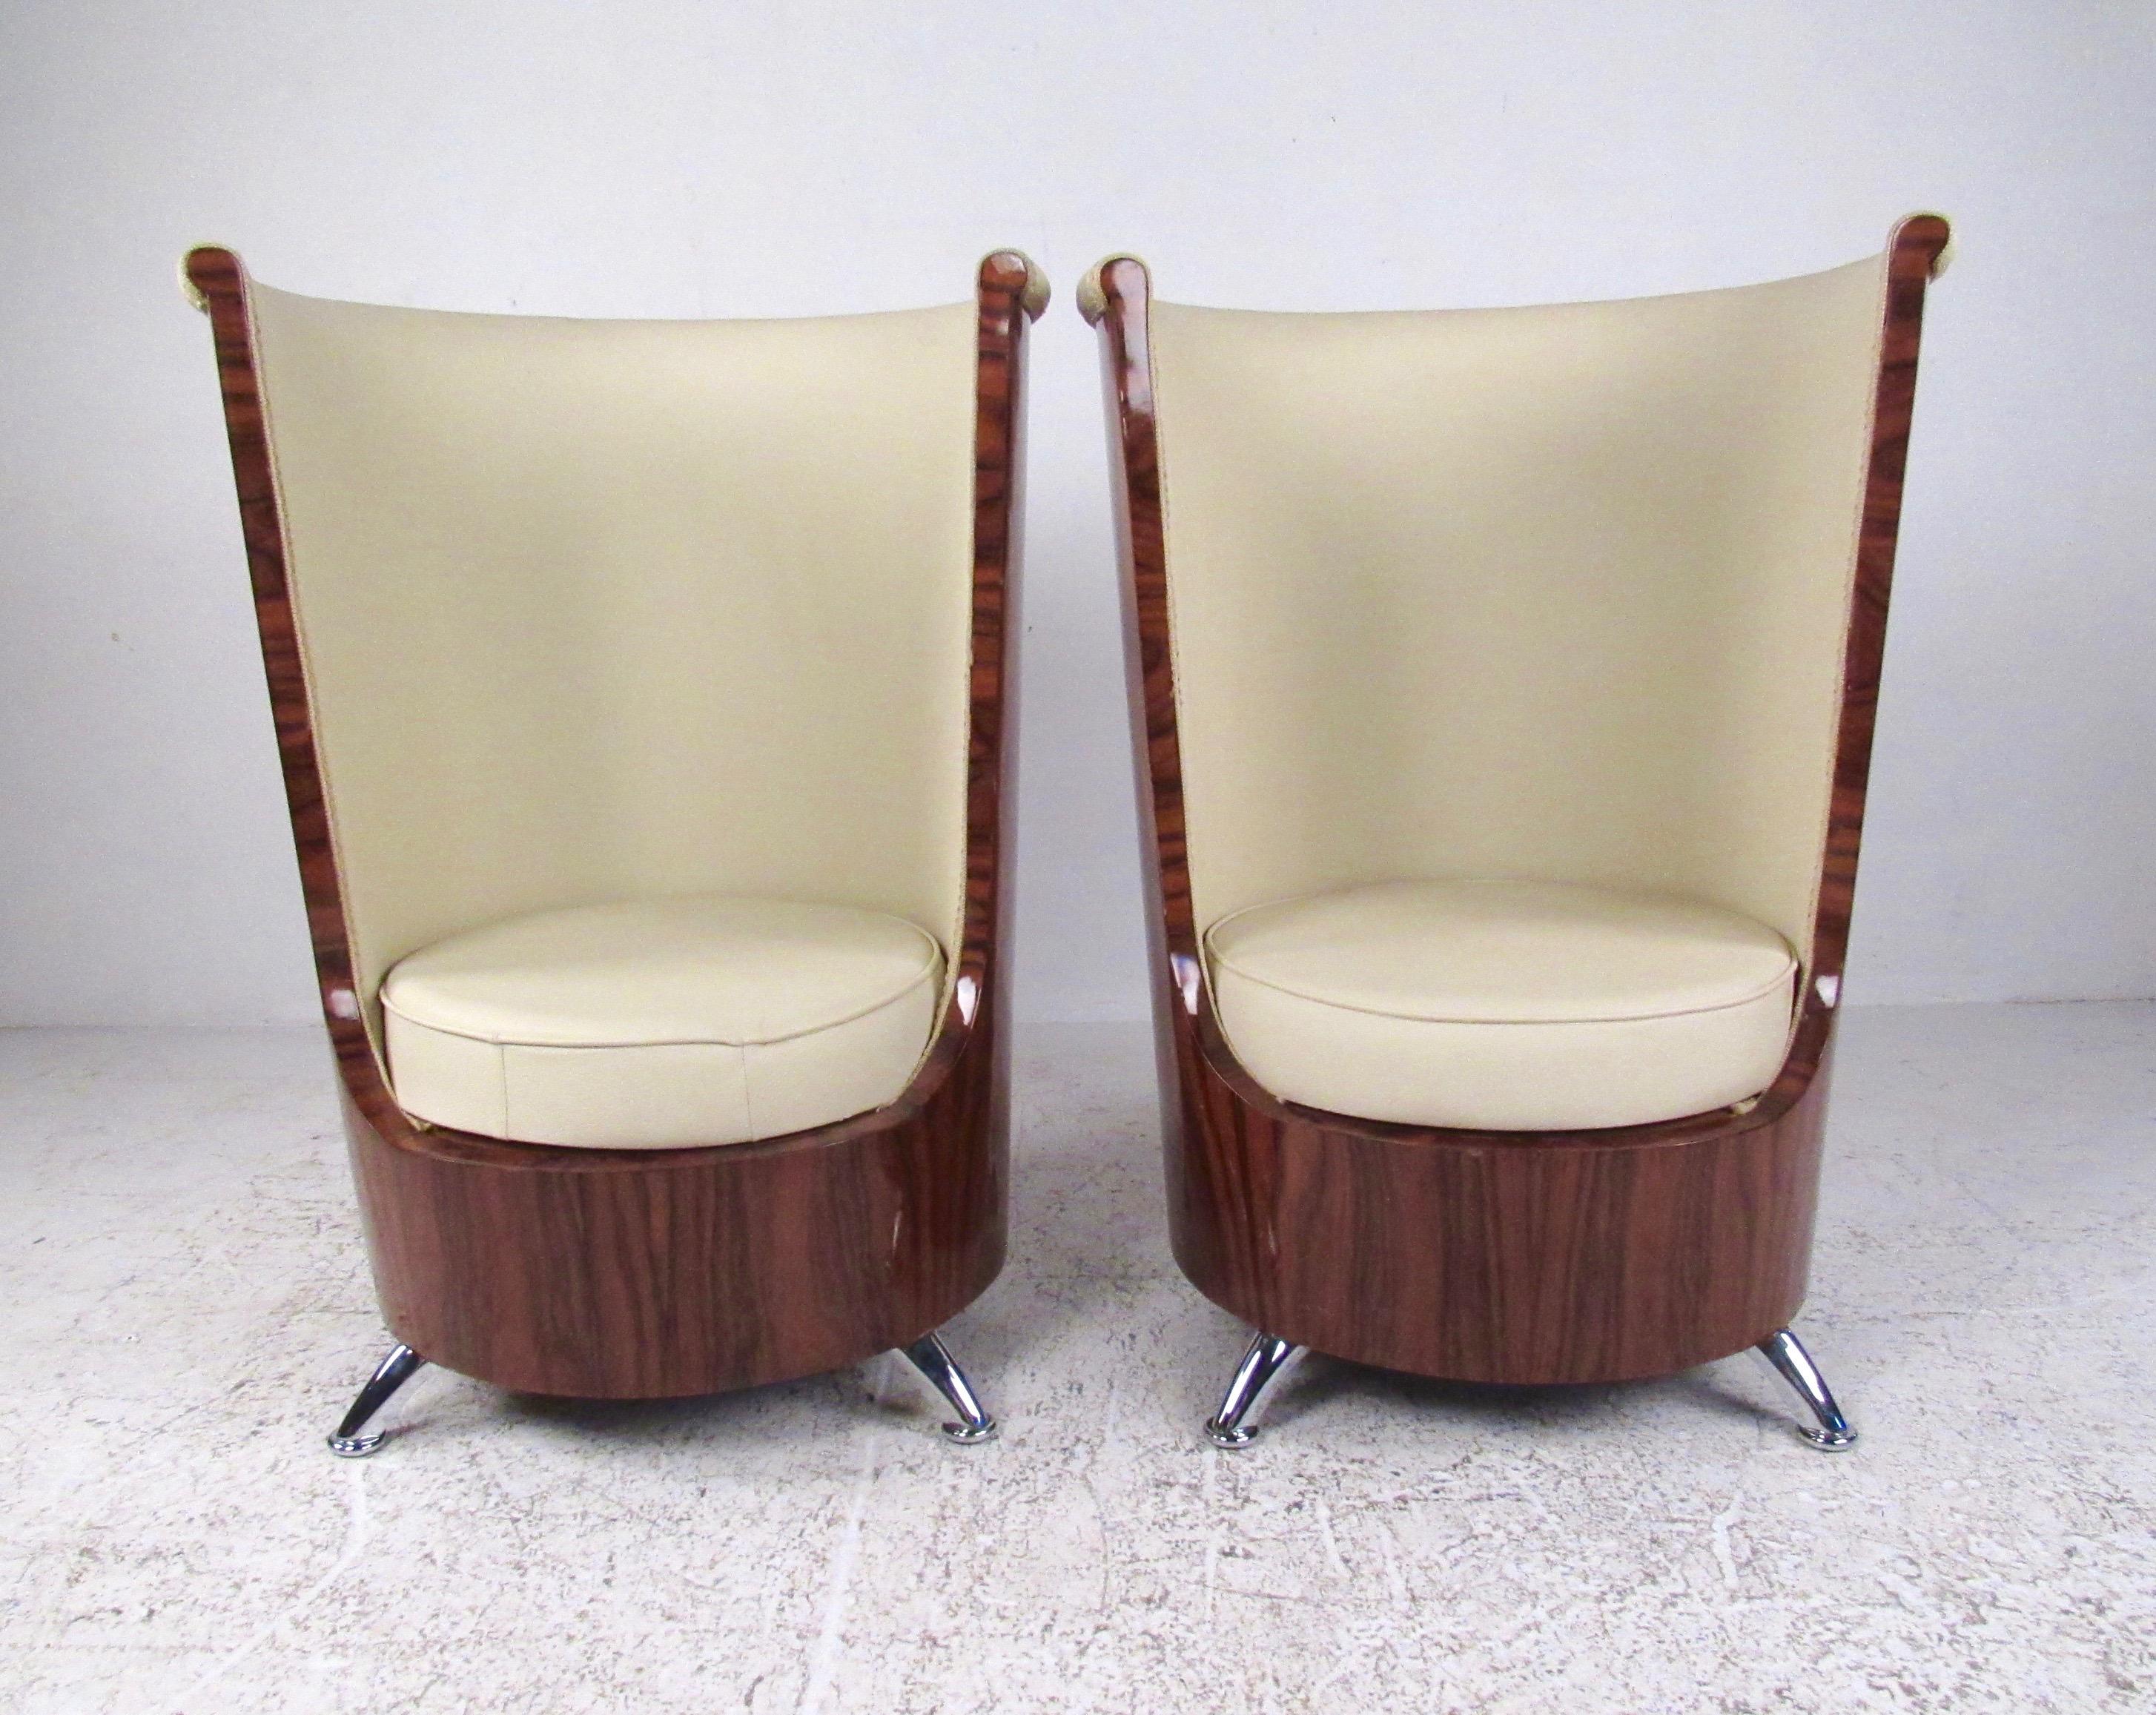 This unique pair of modern deco style barrel back lounge chairs feature a unique lacquered wood finish complimented by faux chrome legs and cream colored vinyl seats. Comfortable and striking Italian modern style makes an impressive addition to home